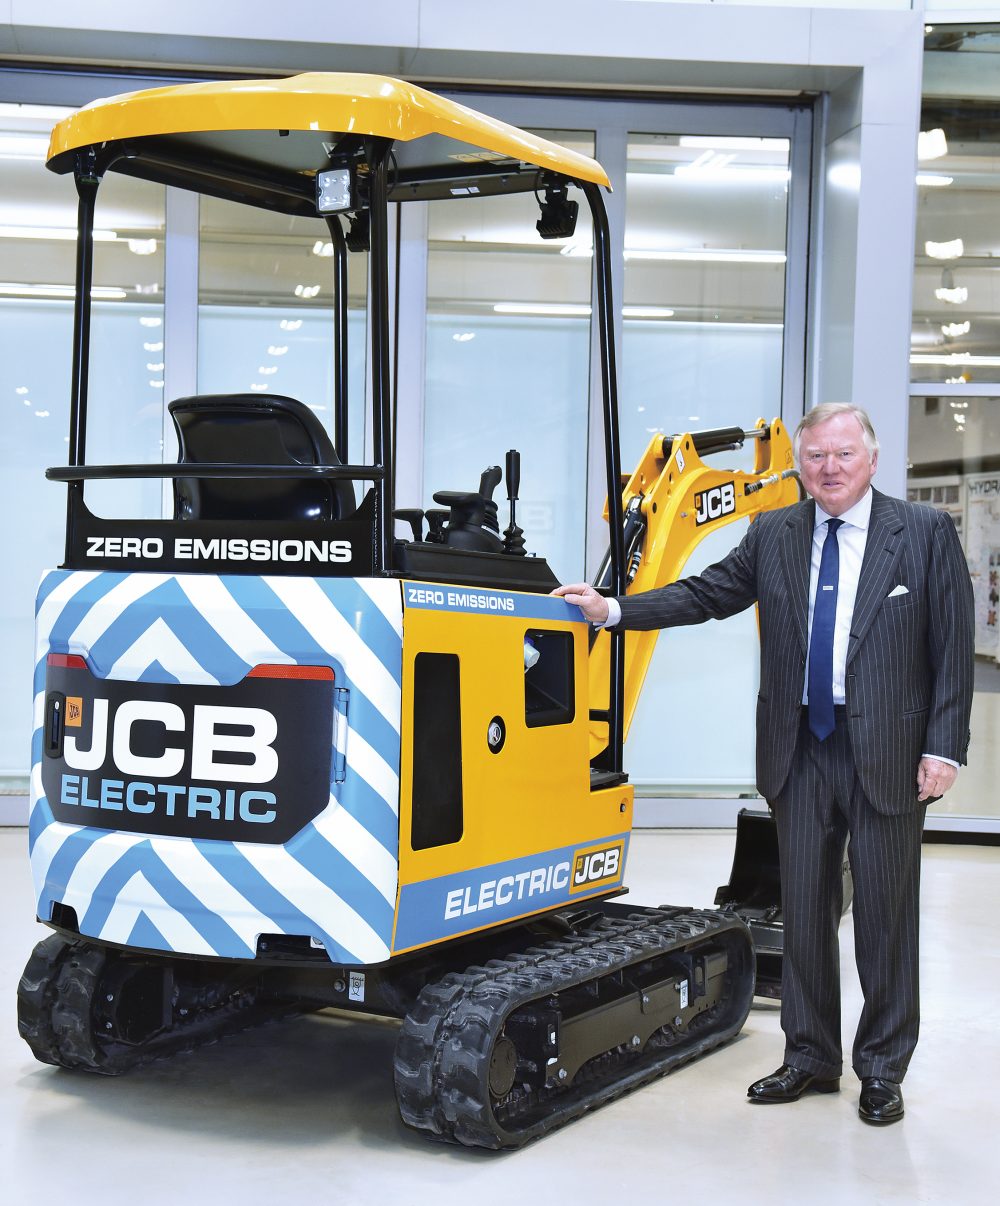 JCB Chairman Lord Bamford who has spearheaded the company's development of its first ever electric digger.